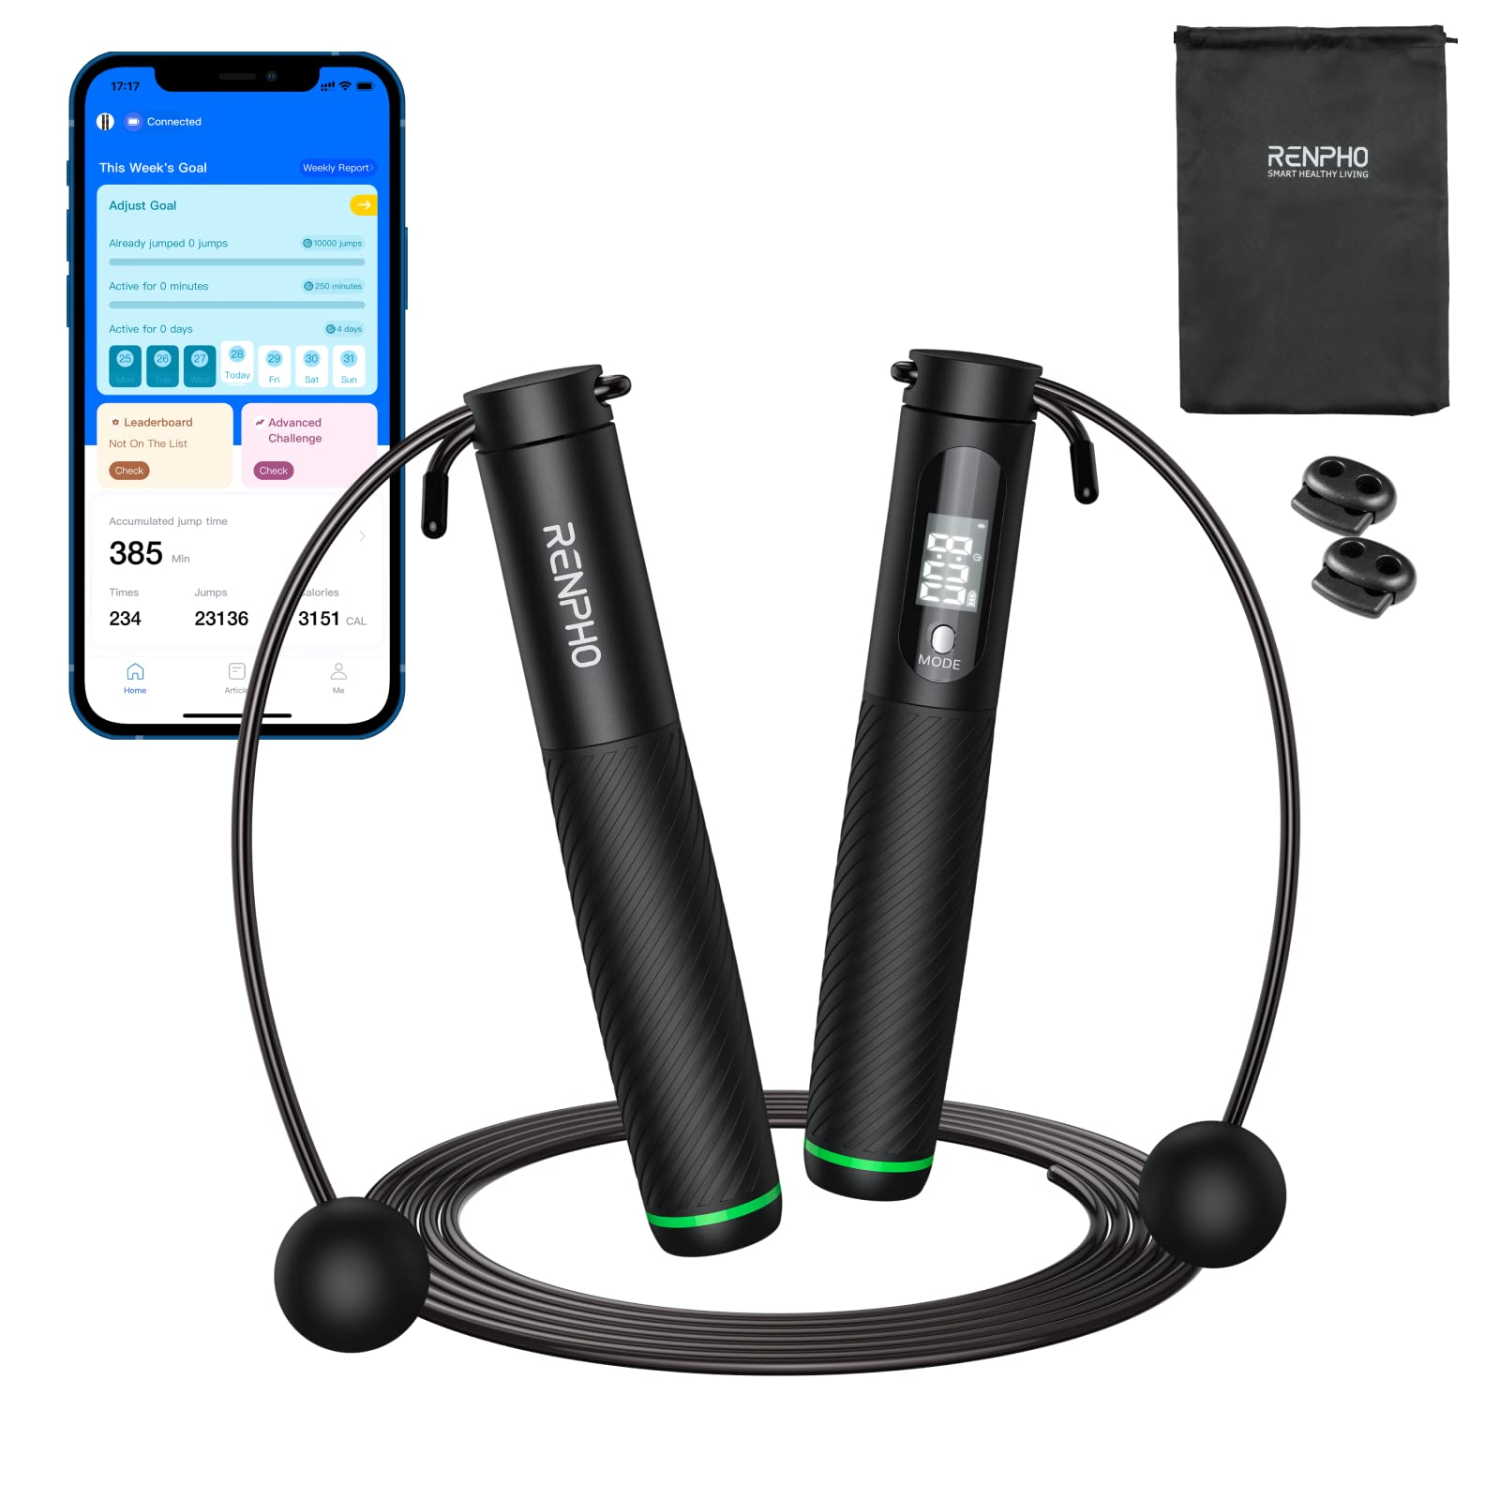 RENPHO Cordless Jump Rope, Weighted Jump Rope with Counter, Jump Ropes for Fitness, Smart Skipping Rope for Crossfit, Gym, Burn Calorie, APP Data Analysis